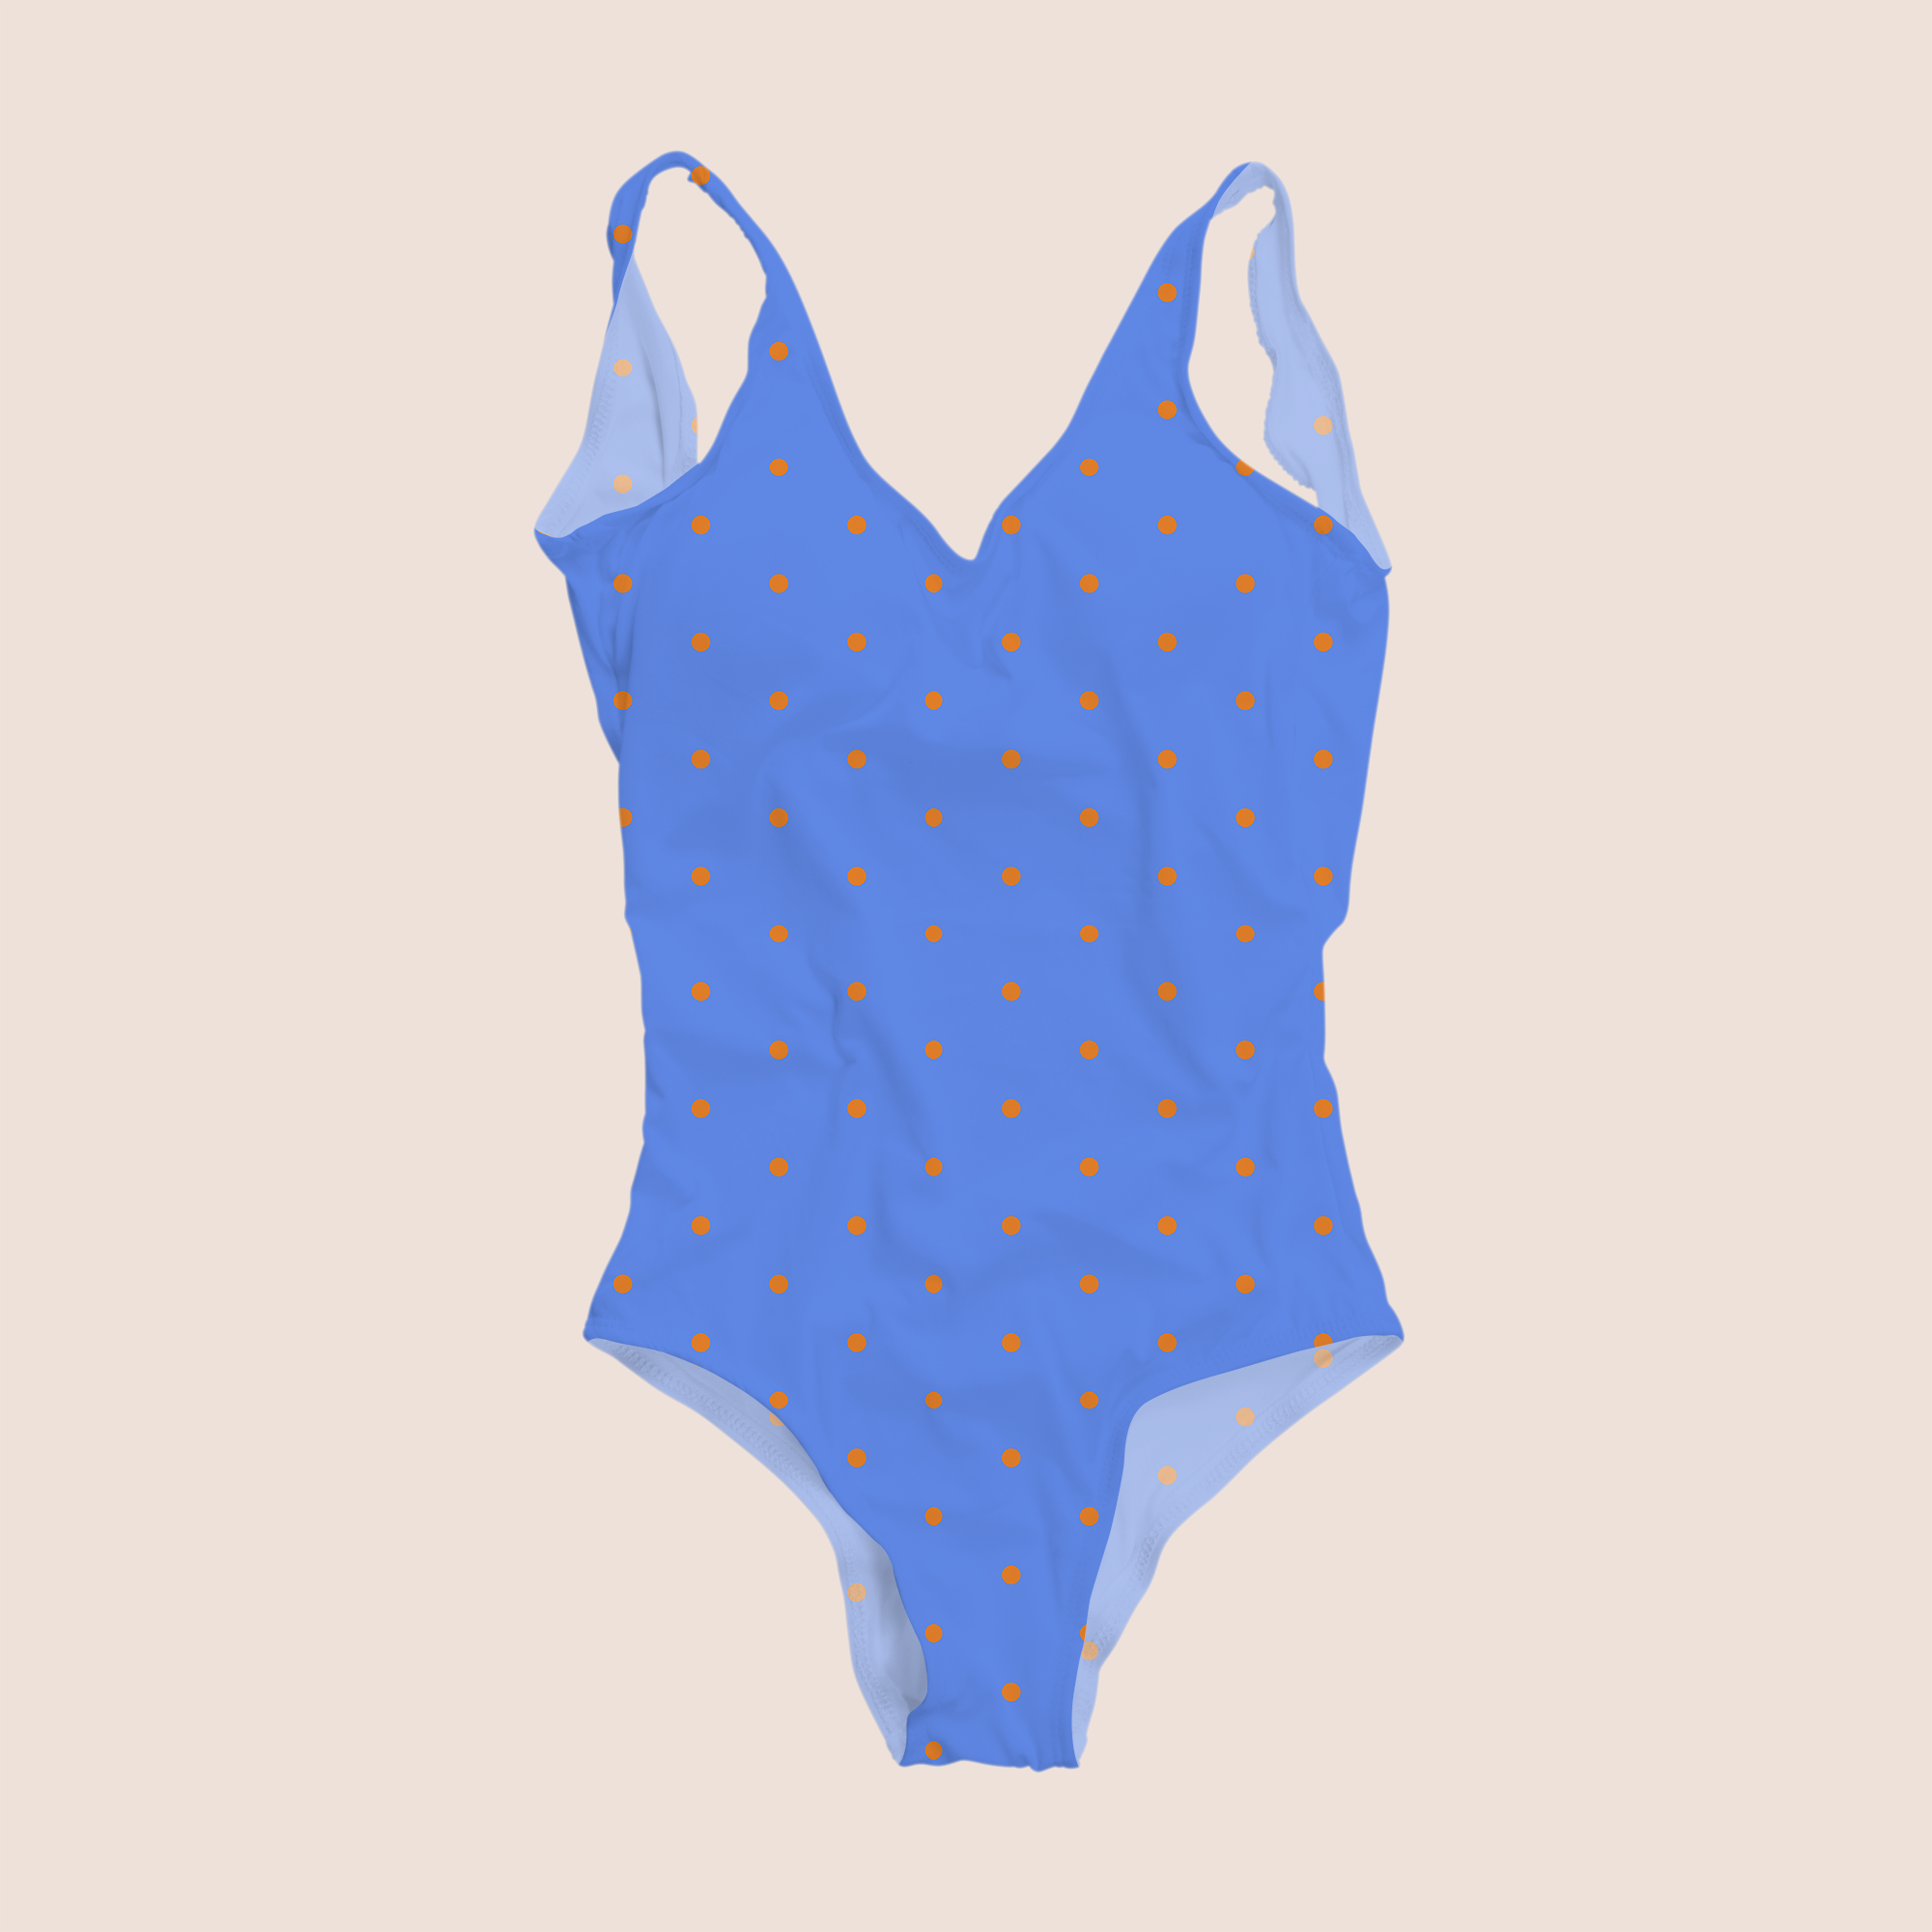 Trivial dots trendy in blue pattern design printed on recycled fabric swimwear